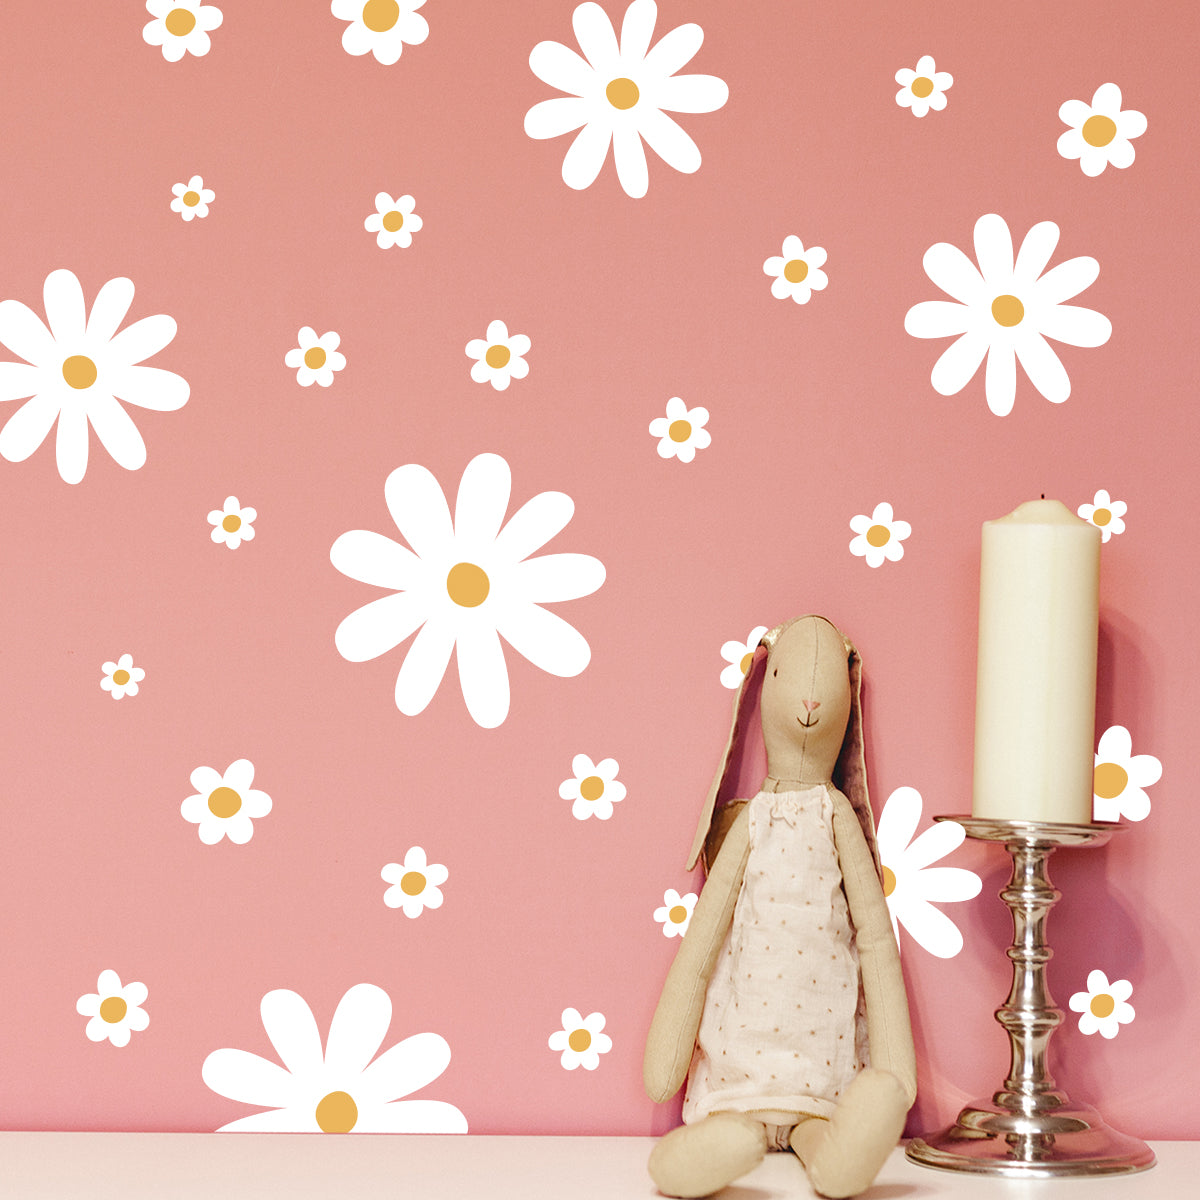 Cute Daisy Decals Removable Kids Wall Sticker